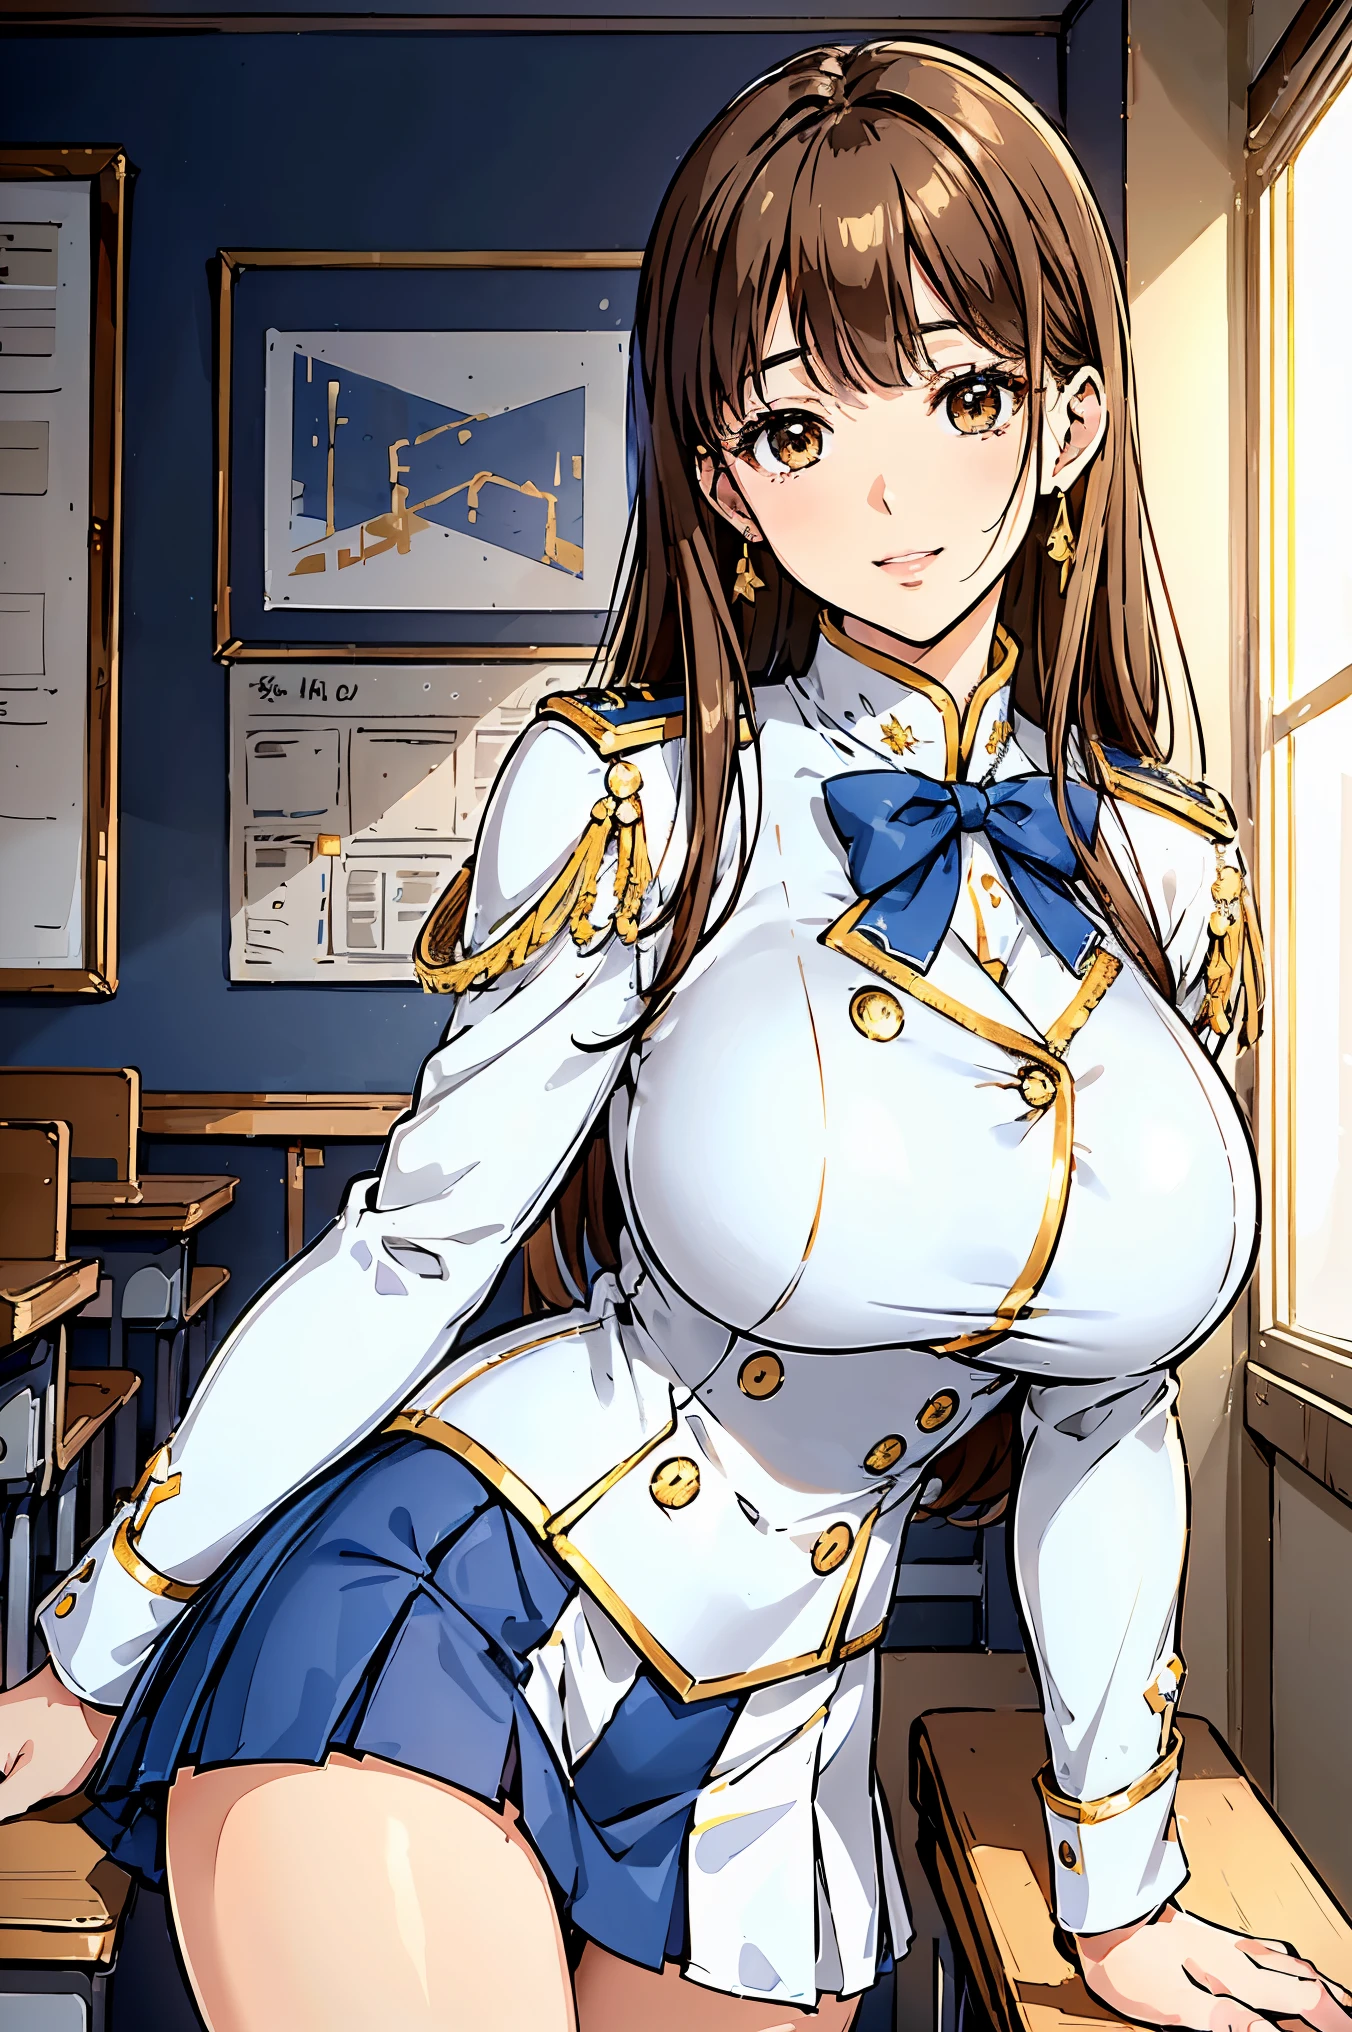 elite , Blue, White and Gold Uniform, White Skirt, White top, Blue Ribbon, Gold Button, Golden shoulder massage, Young people, 19 years, Brown Hair, Haircut with dull bangs, Brown eyes, beautiful Brown eyes, Large Breasts, Impressive body curves, Naughty smile, Pink Lips, , Cute pose, masterpiece, Classroom Background, School